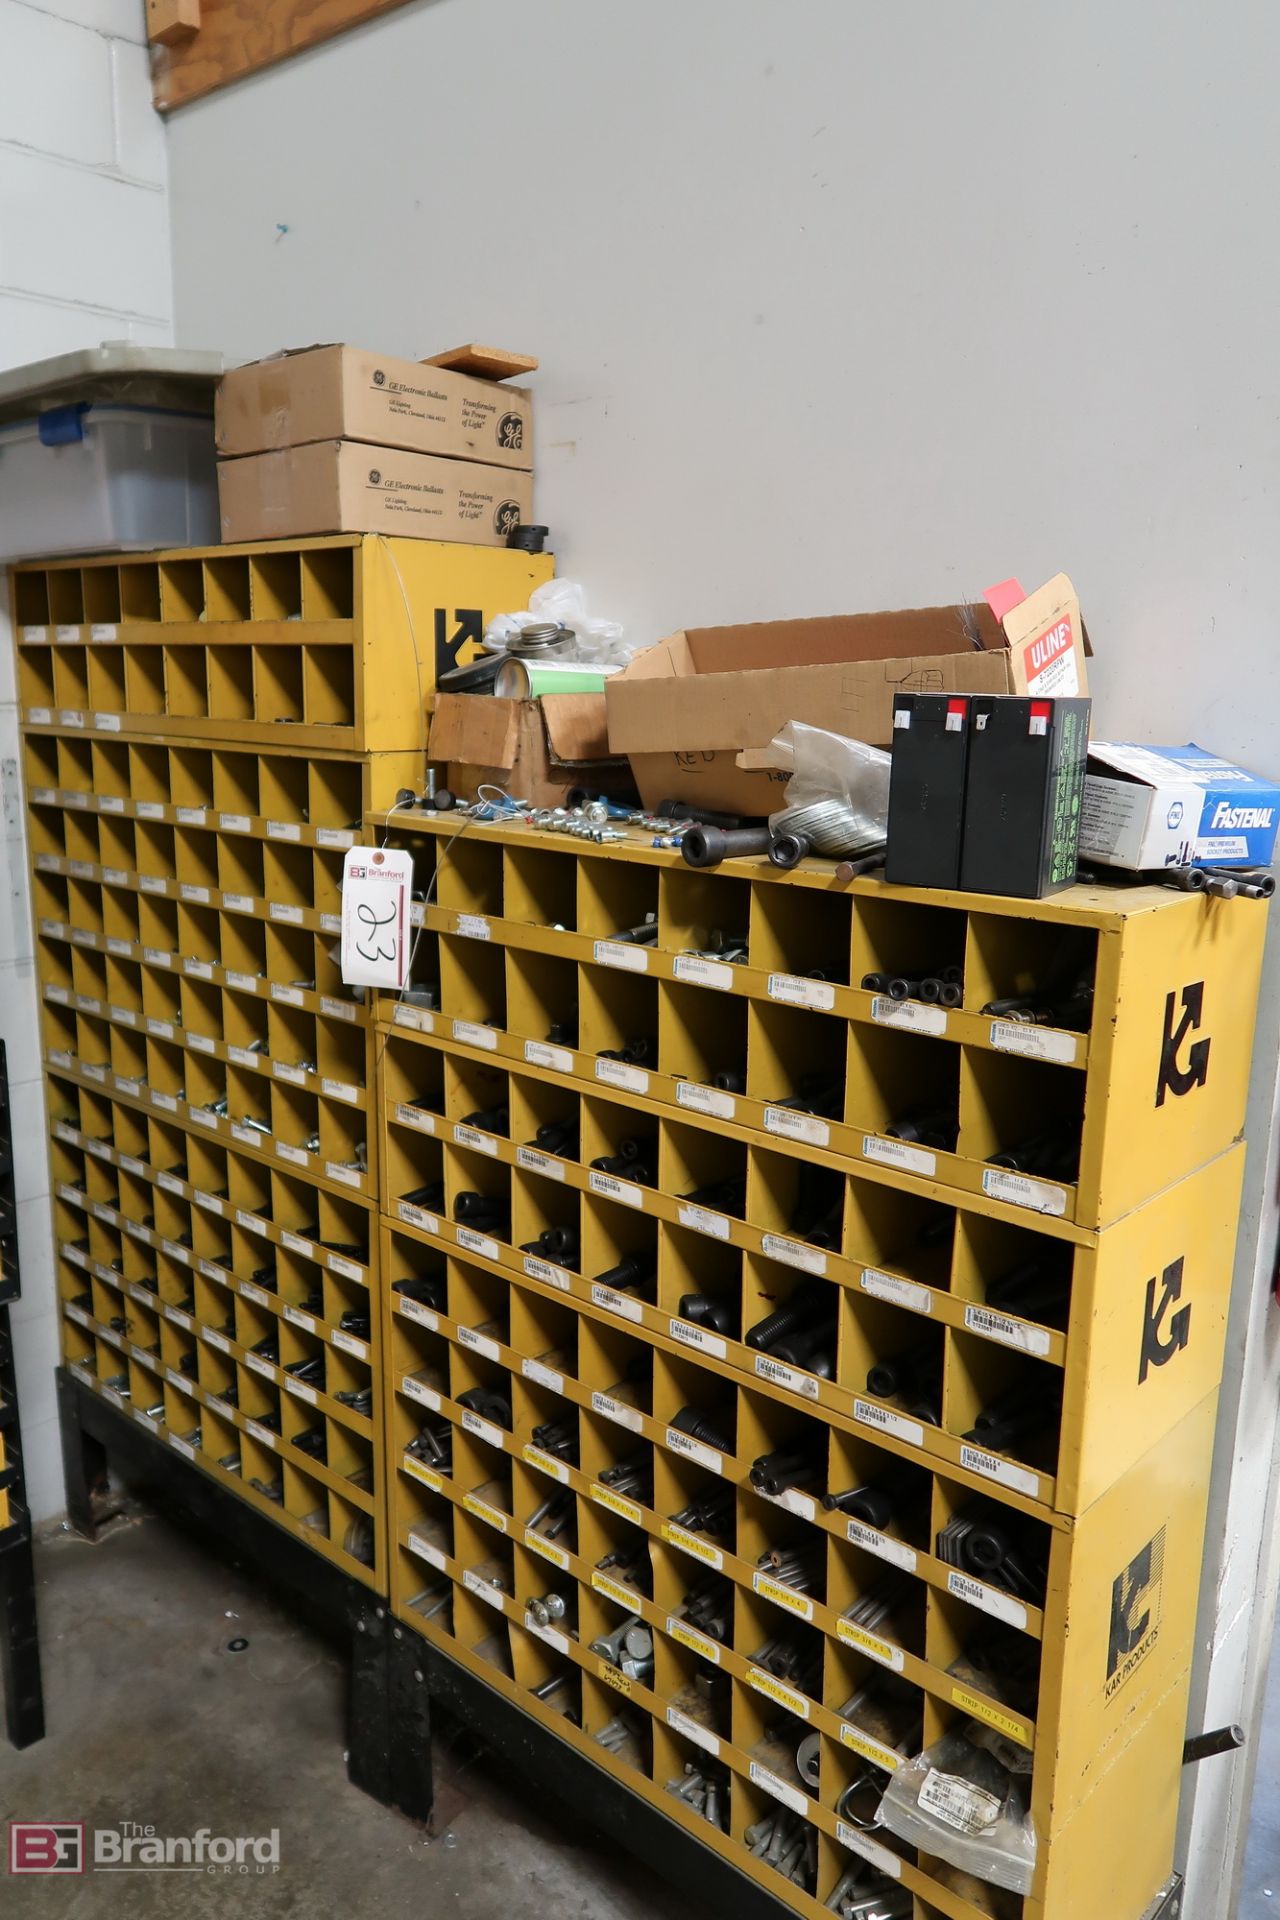 Karr Products Parts Bins with Contents